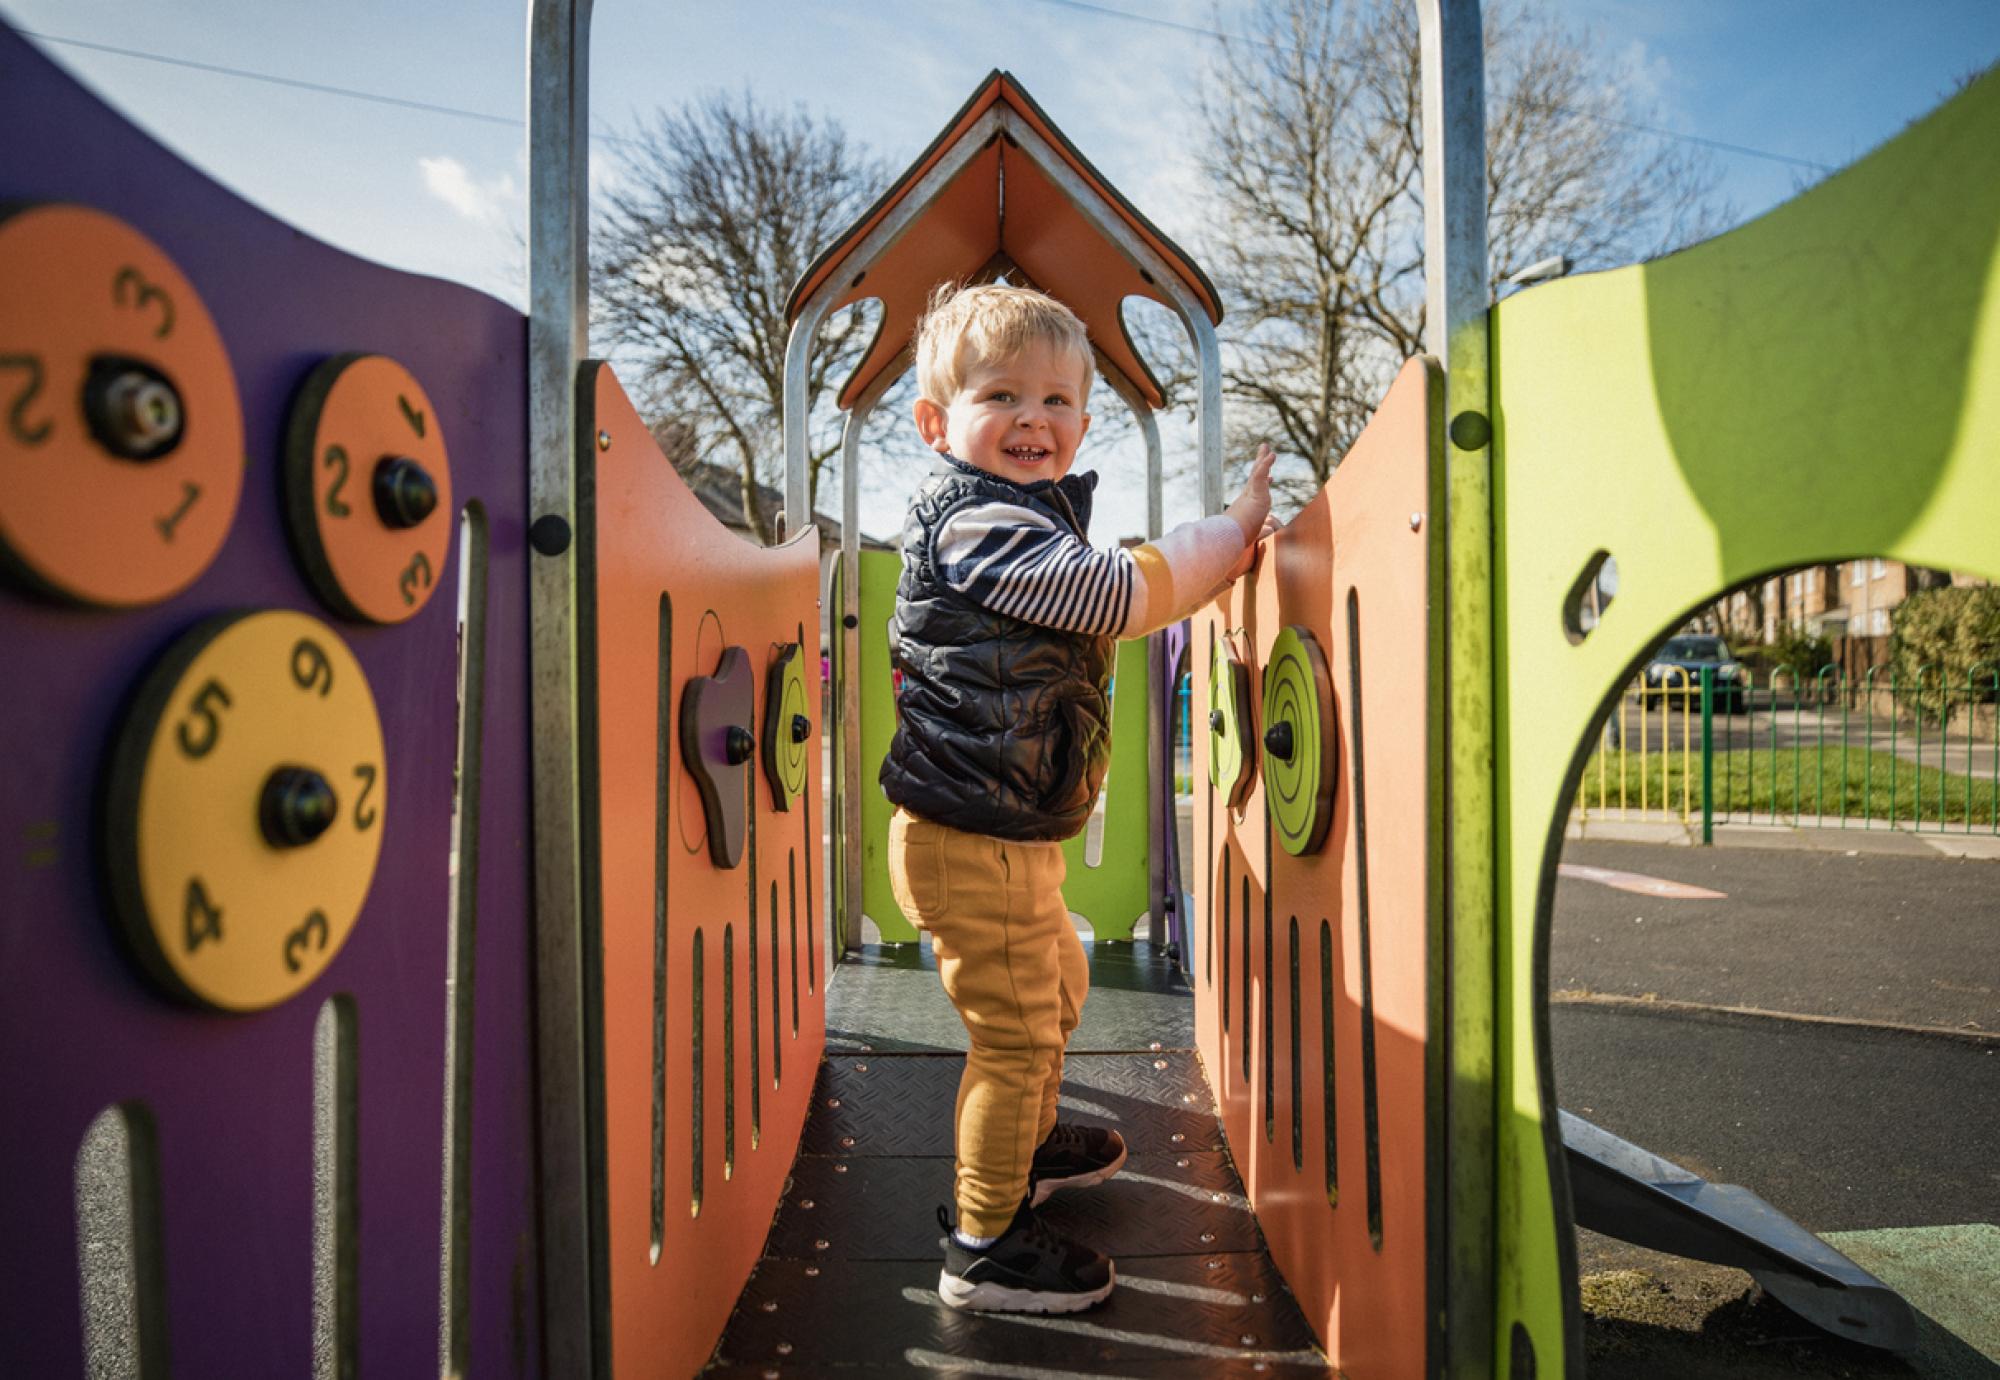 Young boy playing at a public park on a climbing frame on a sunny day